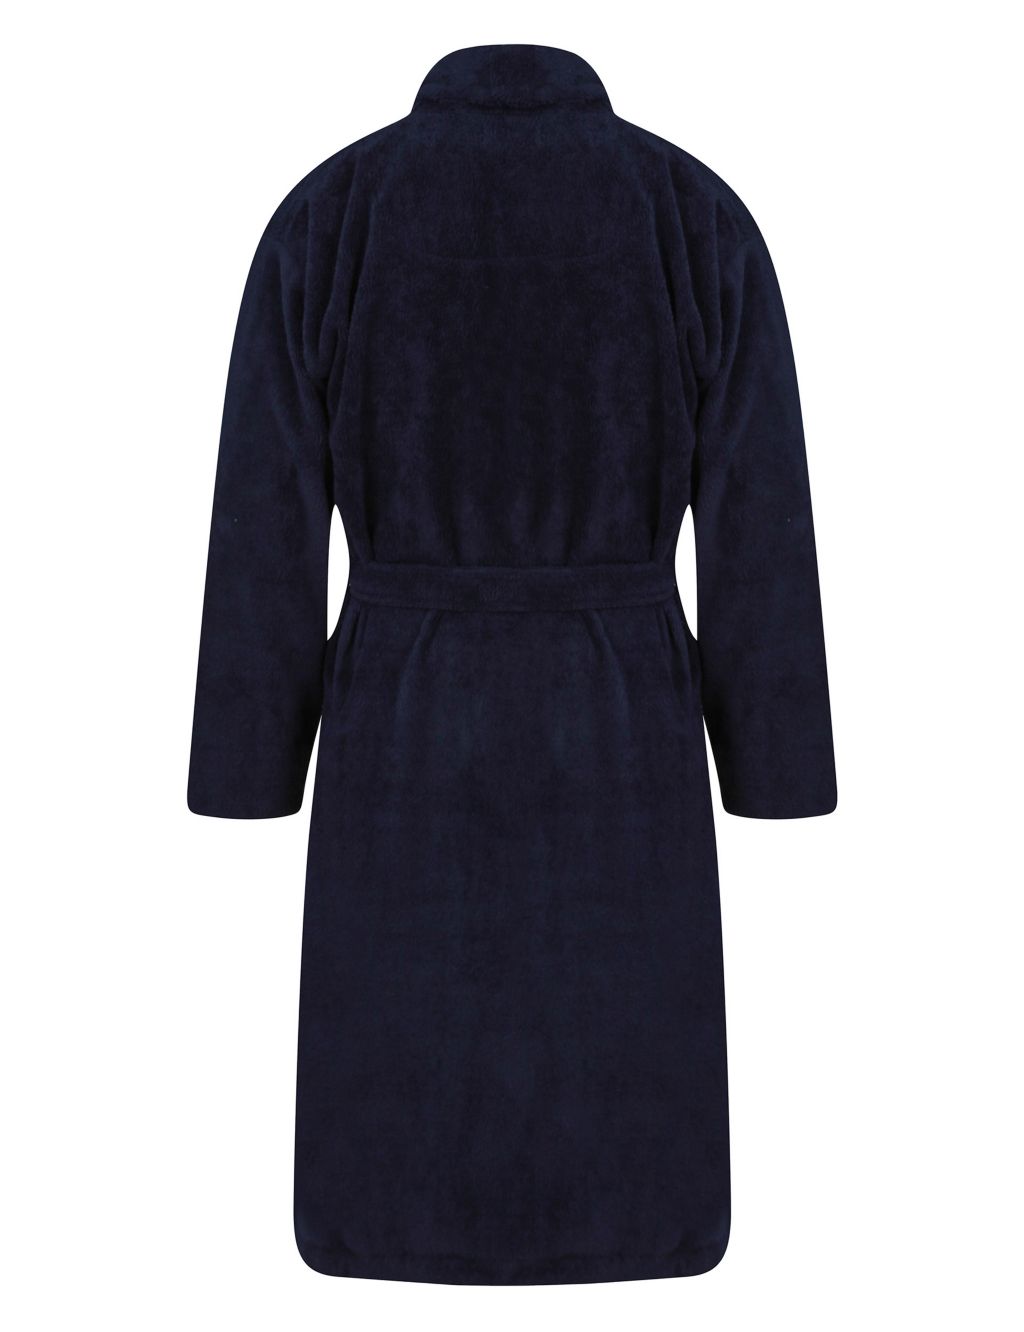 Cotton Blend Dressing Gown image 2